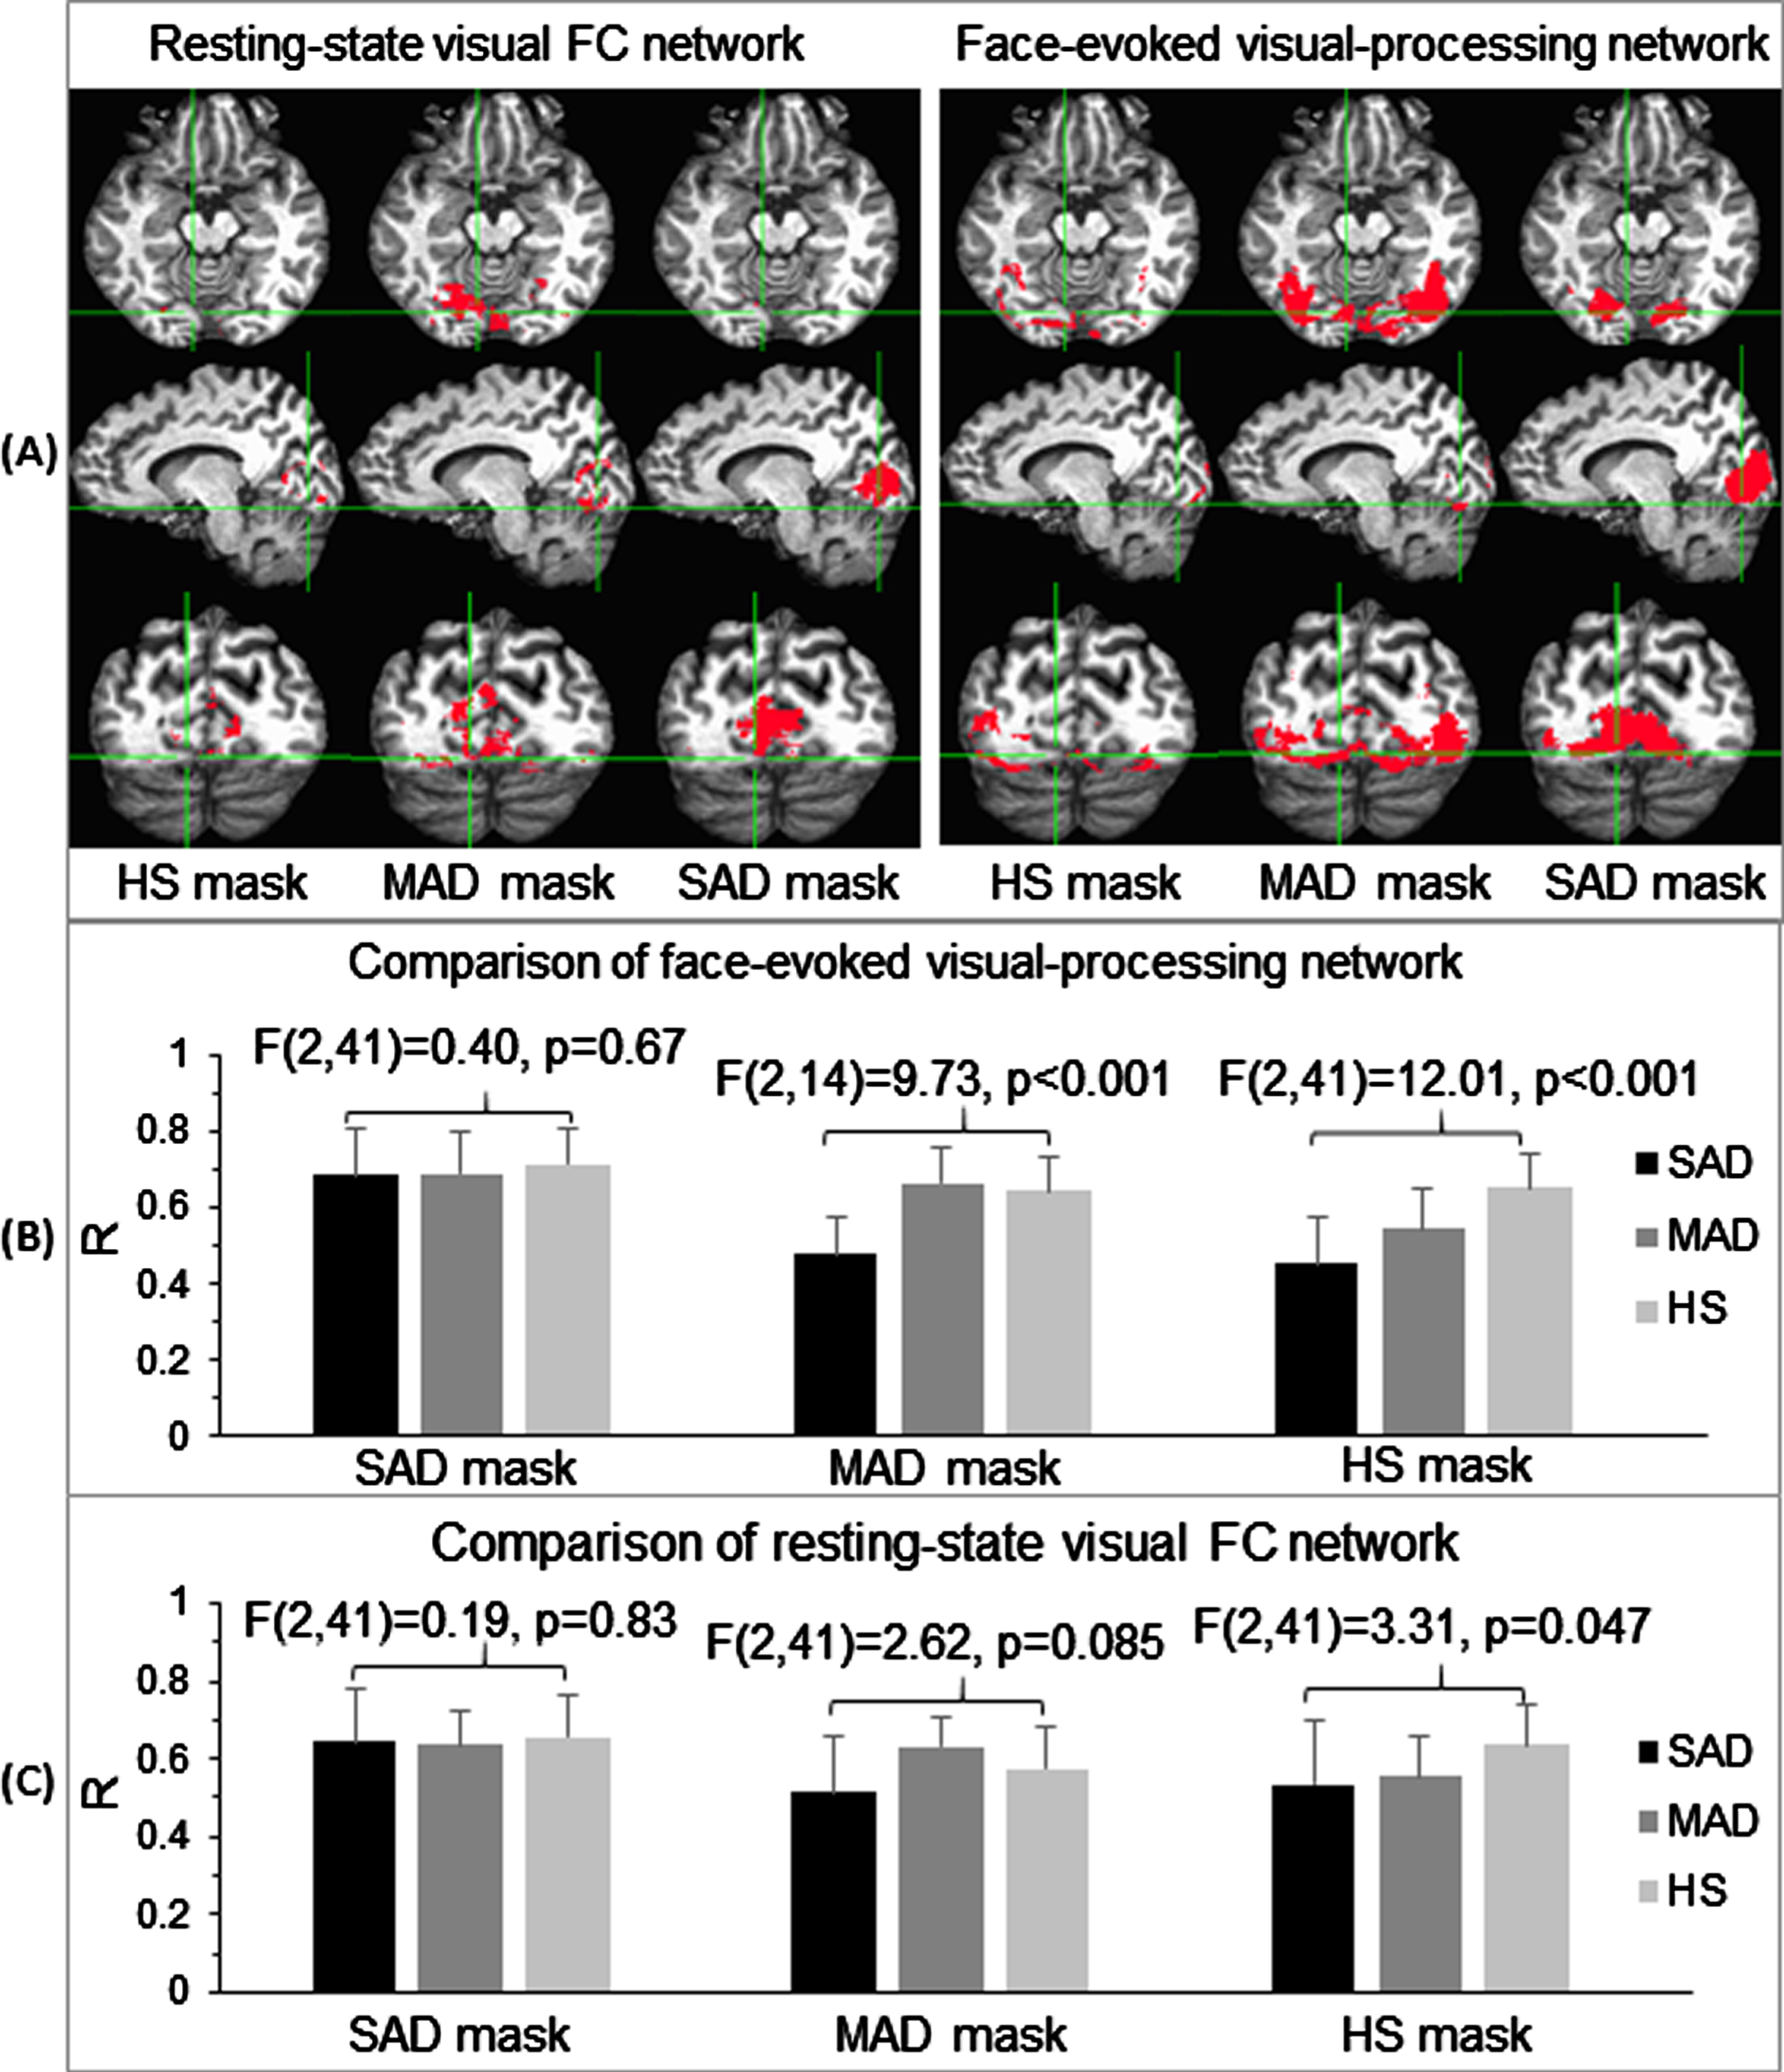 Illustration of the three group-specific network masks for the two functional states (A), and their corresponding group comparisons for the three subject groups: the face-evoked visual-processing network (B) and the resting-state visual FC network (C). For each functional network, the SAD mask is the cortical area of the corresponding functional network of the SAD patients alone. The MAD mask is the cortical area of the corresponding functional network of the MAD patients, excluding the corresponding SAD mask, i.e., the part of the MAD network distinct from the SAD network. The HS mask is the cortical area of the corresponding functional network of the HS controls, excluding both MAD and SAD masks. The error bar indicates the standard deviation.